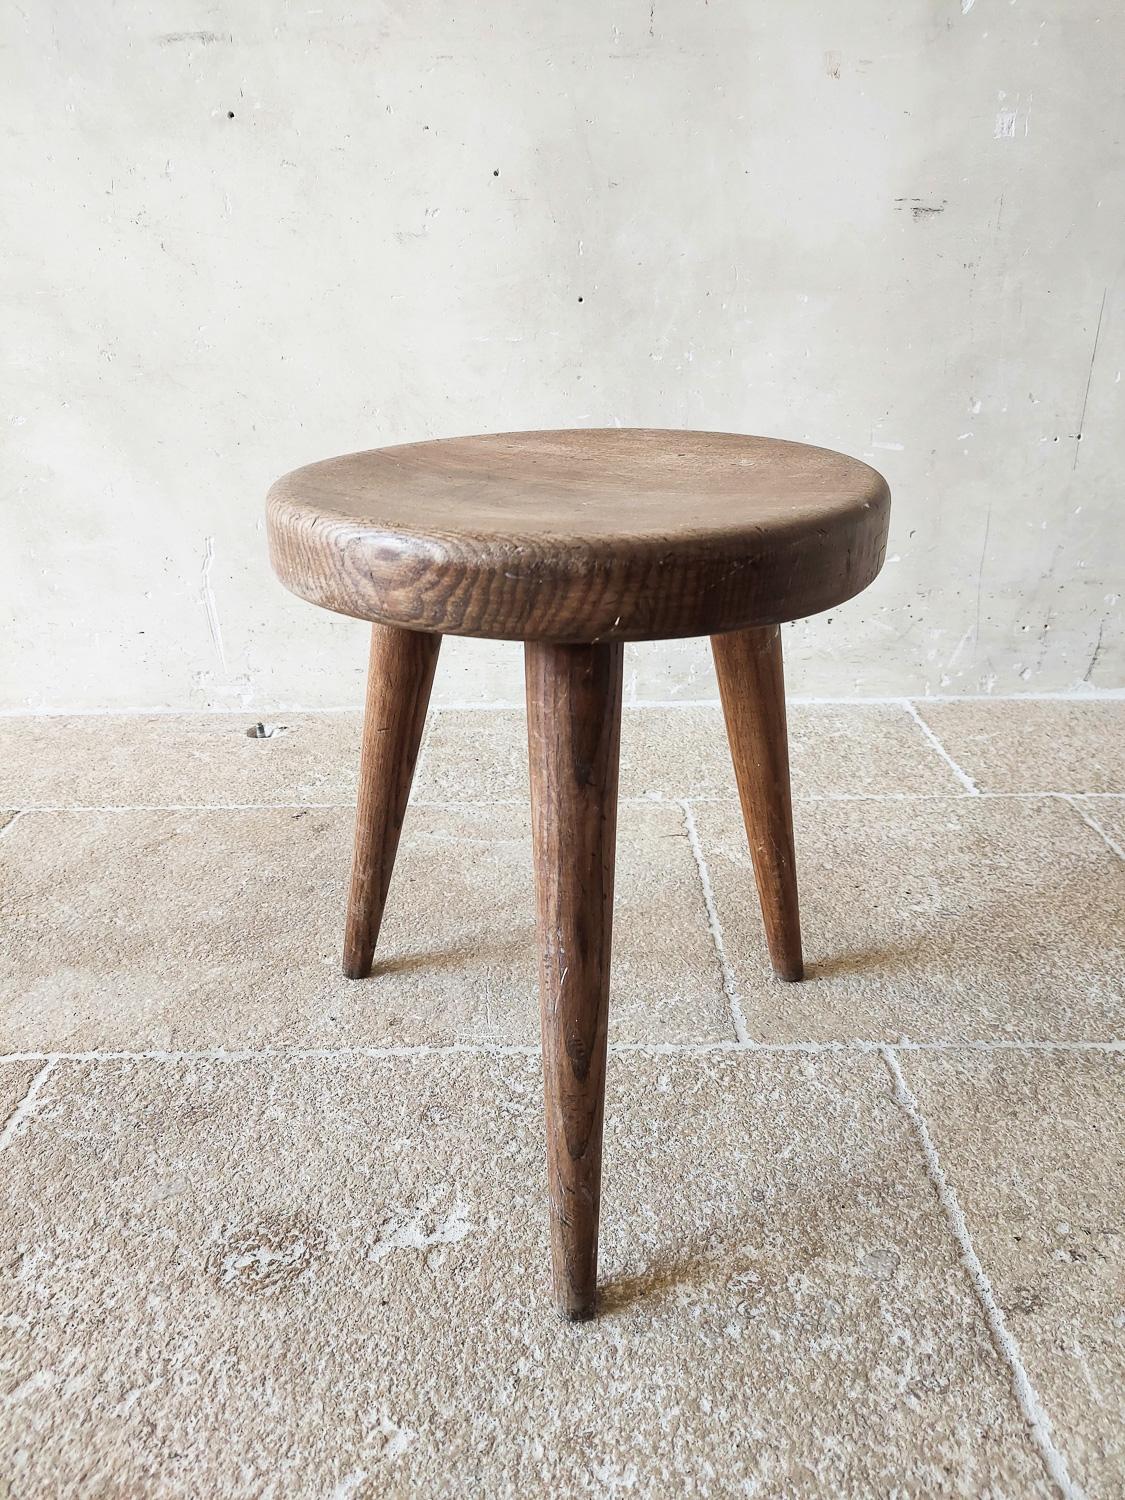 Turned Charlotte Perriand Wooden Berger Stool, circa 1950 For Sale